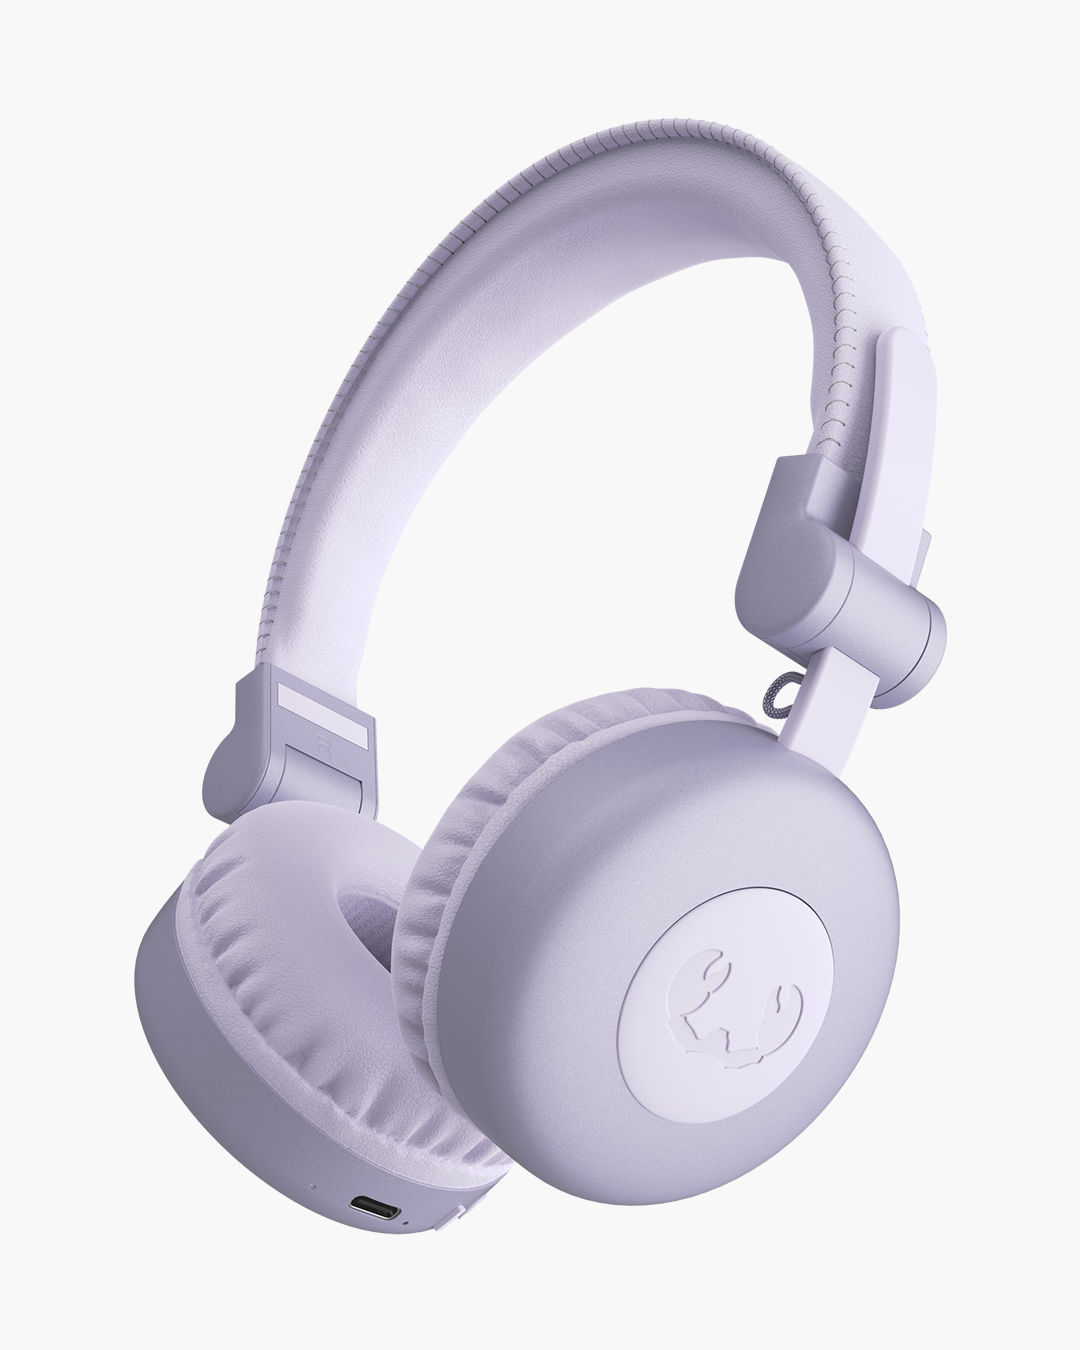 Fresh'n Rebel - Code Core - Wireless over-ear headphone with active noise cancelling - Dreamy Lilac - Artikelnummer: 8720249805922 von Fresh'n Rebel